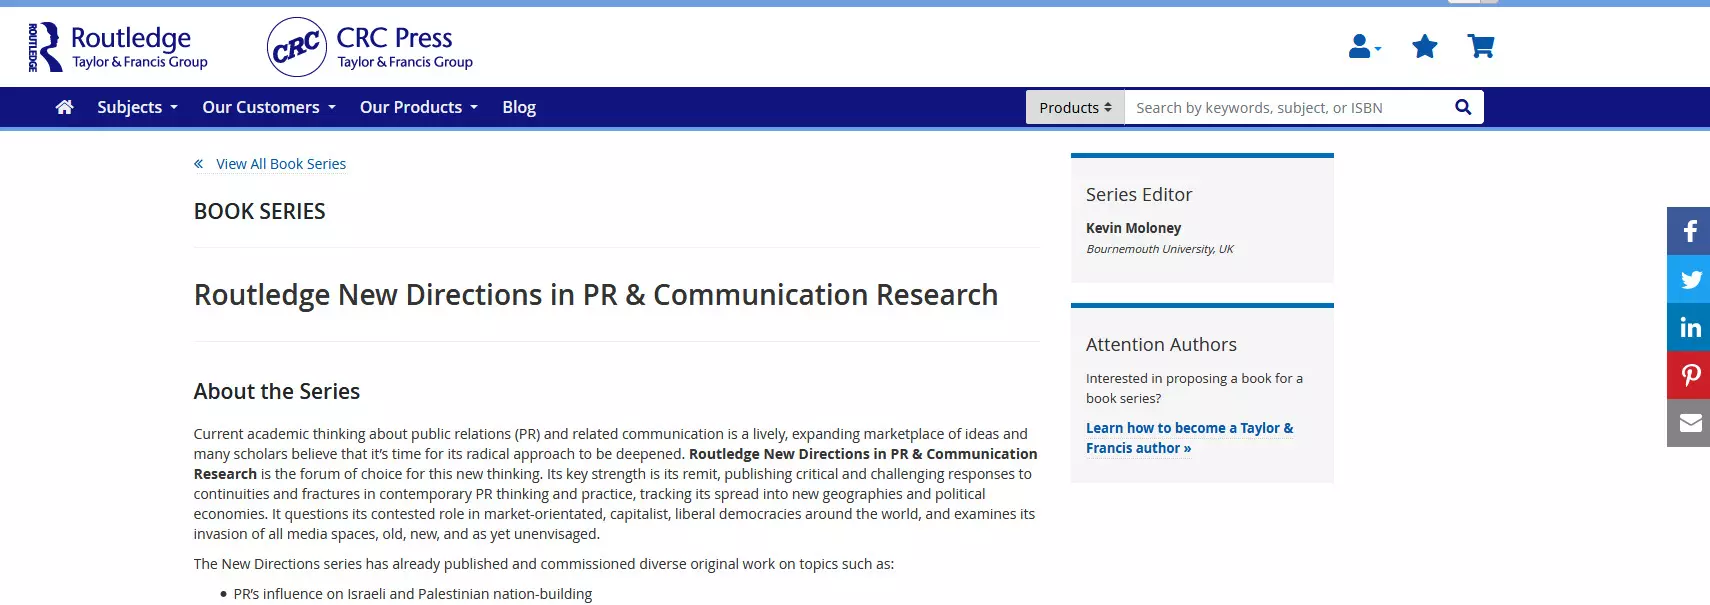 call for chapters: Women and Leadership in the PR Industry (Routledge)